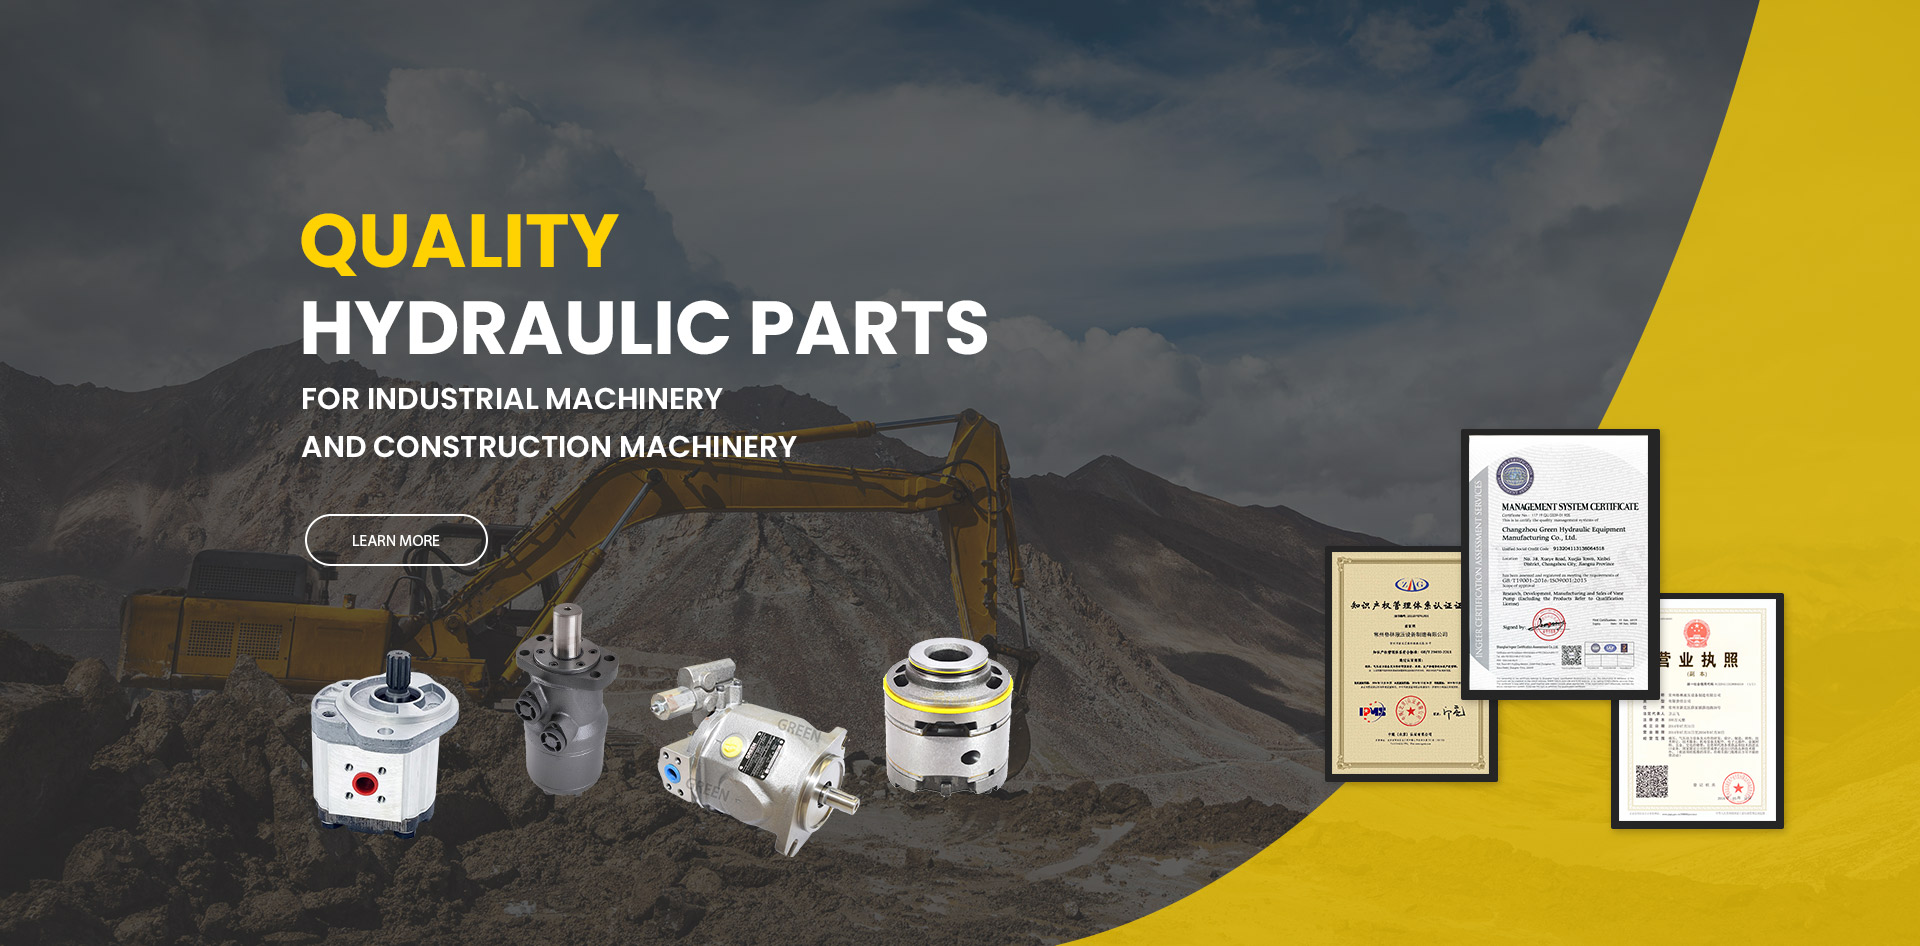 For Industrial machinery  and Construction machinery